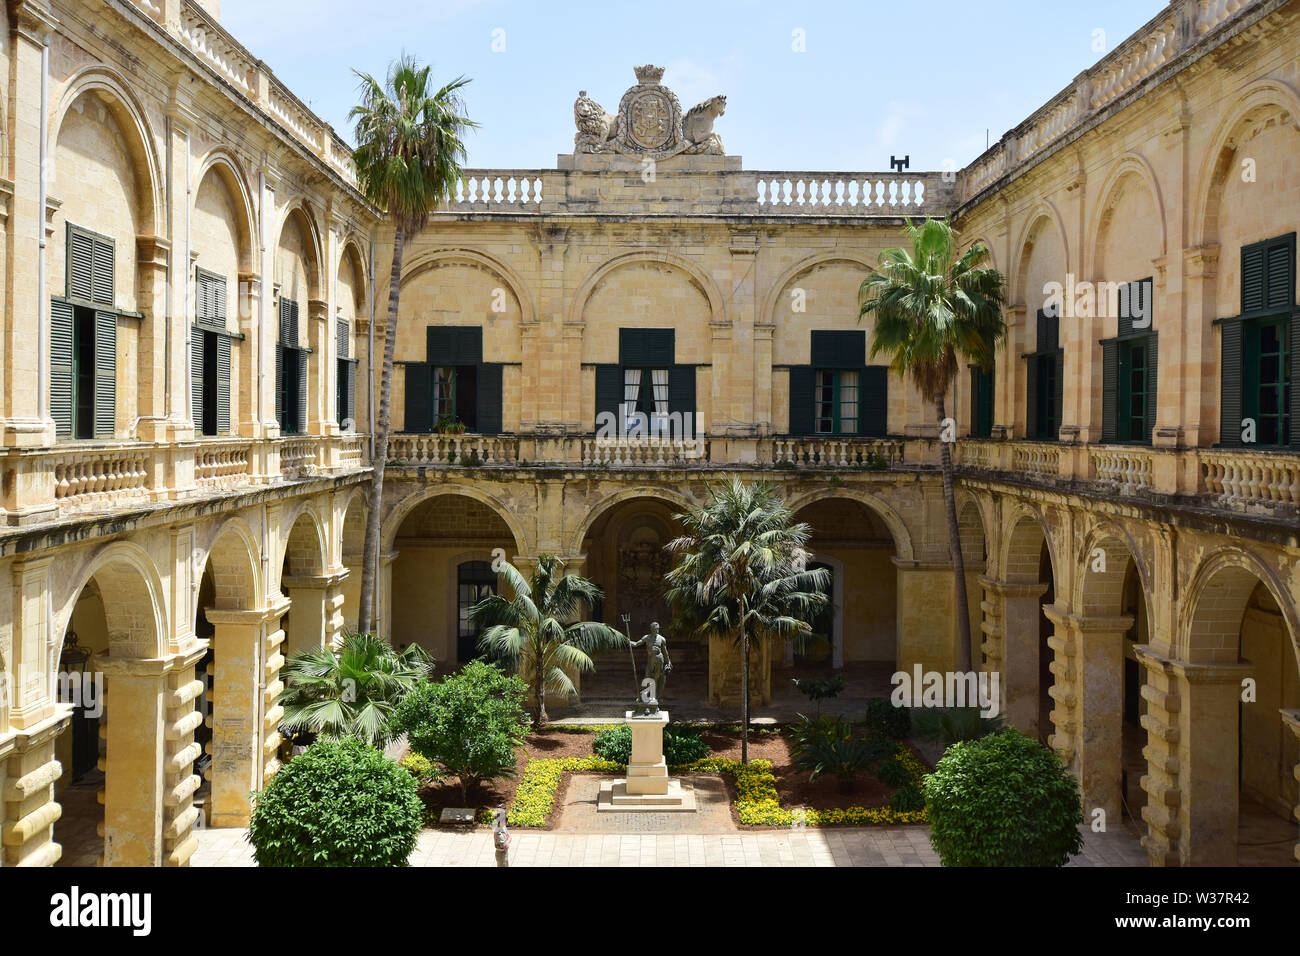 The Grand Master's Palace, Valletta